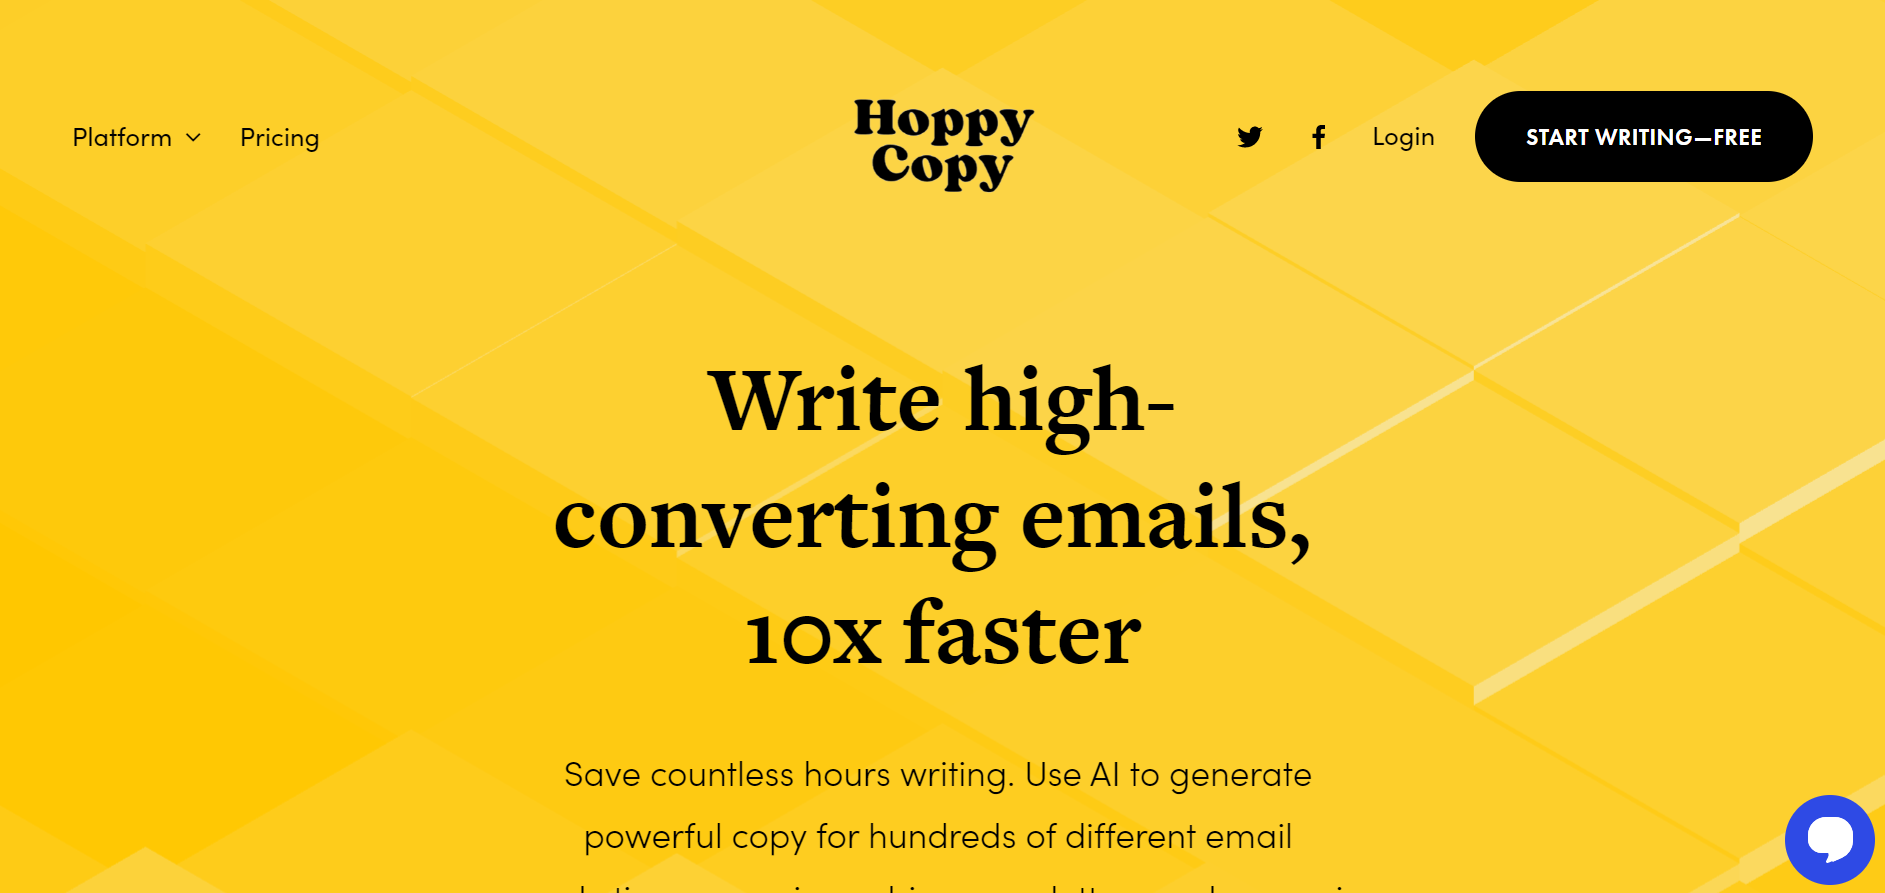 Revolutionize Your Email Game with Hoppycopy.co: The AI-Powered Tool for High-Converting Copy in Seconds.